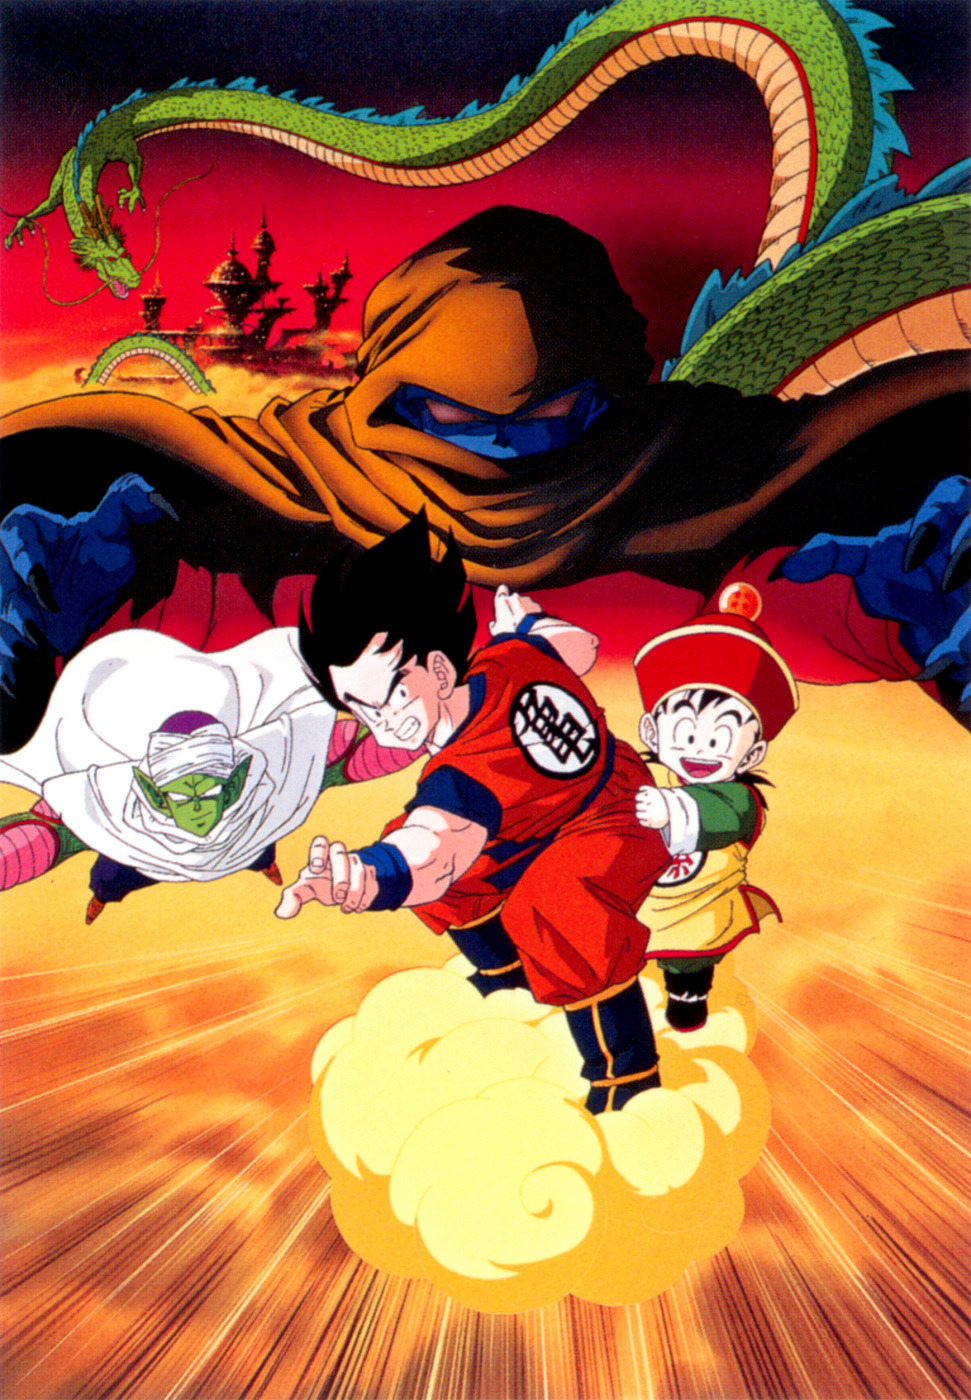 Dragon Ball Z UNCUT: Episode of Bardock Movies Box Art Cover by